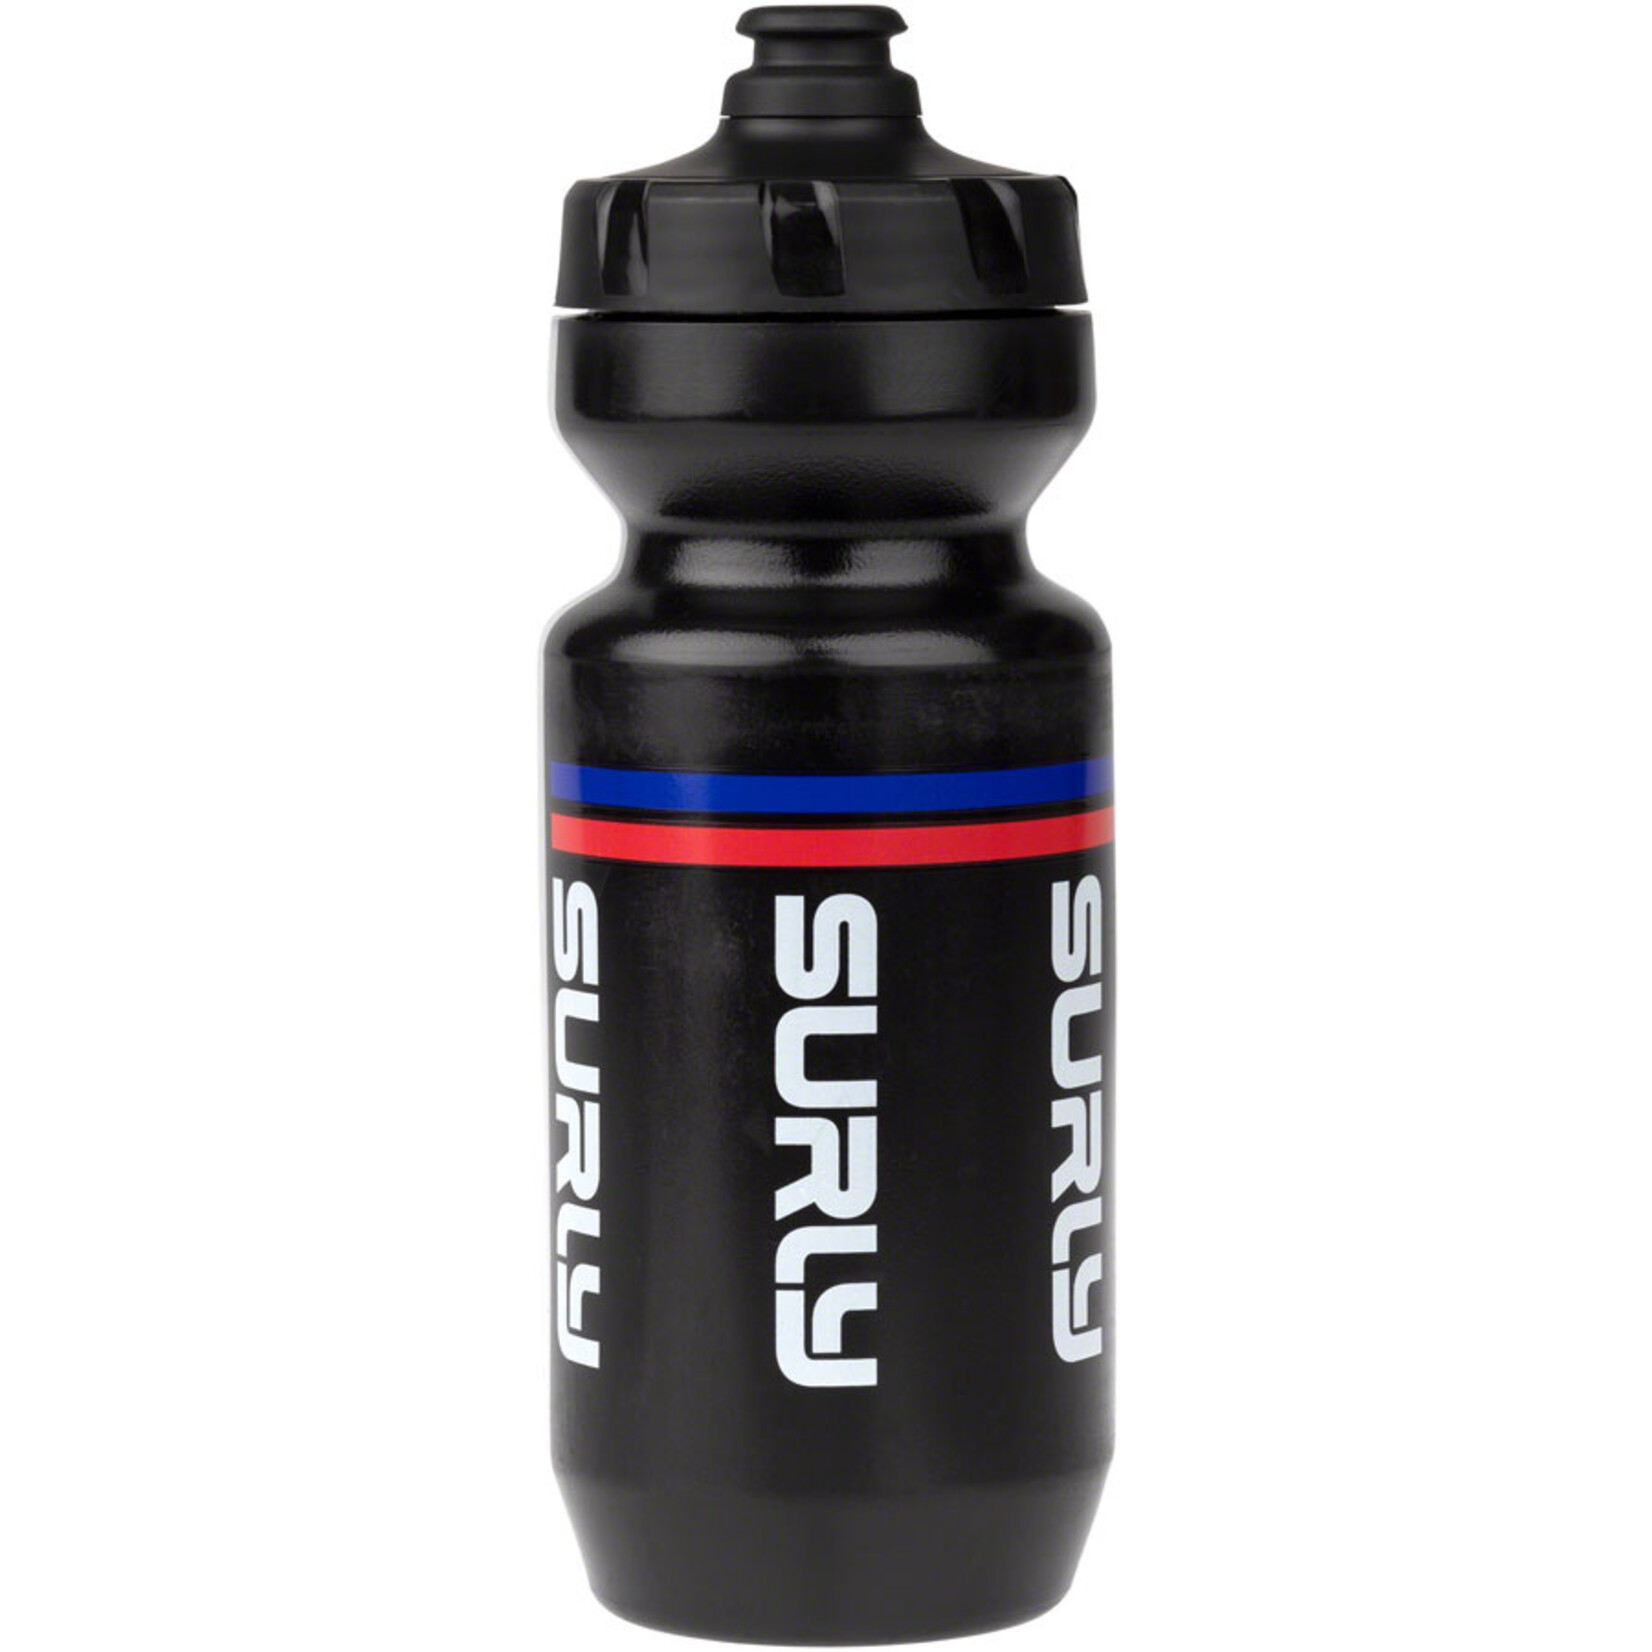 Surly Surly Intergalactic Purist Non-Insulated Water Bottle - Black/Red/Blue, 22 oz